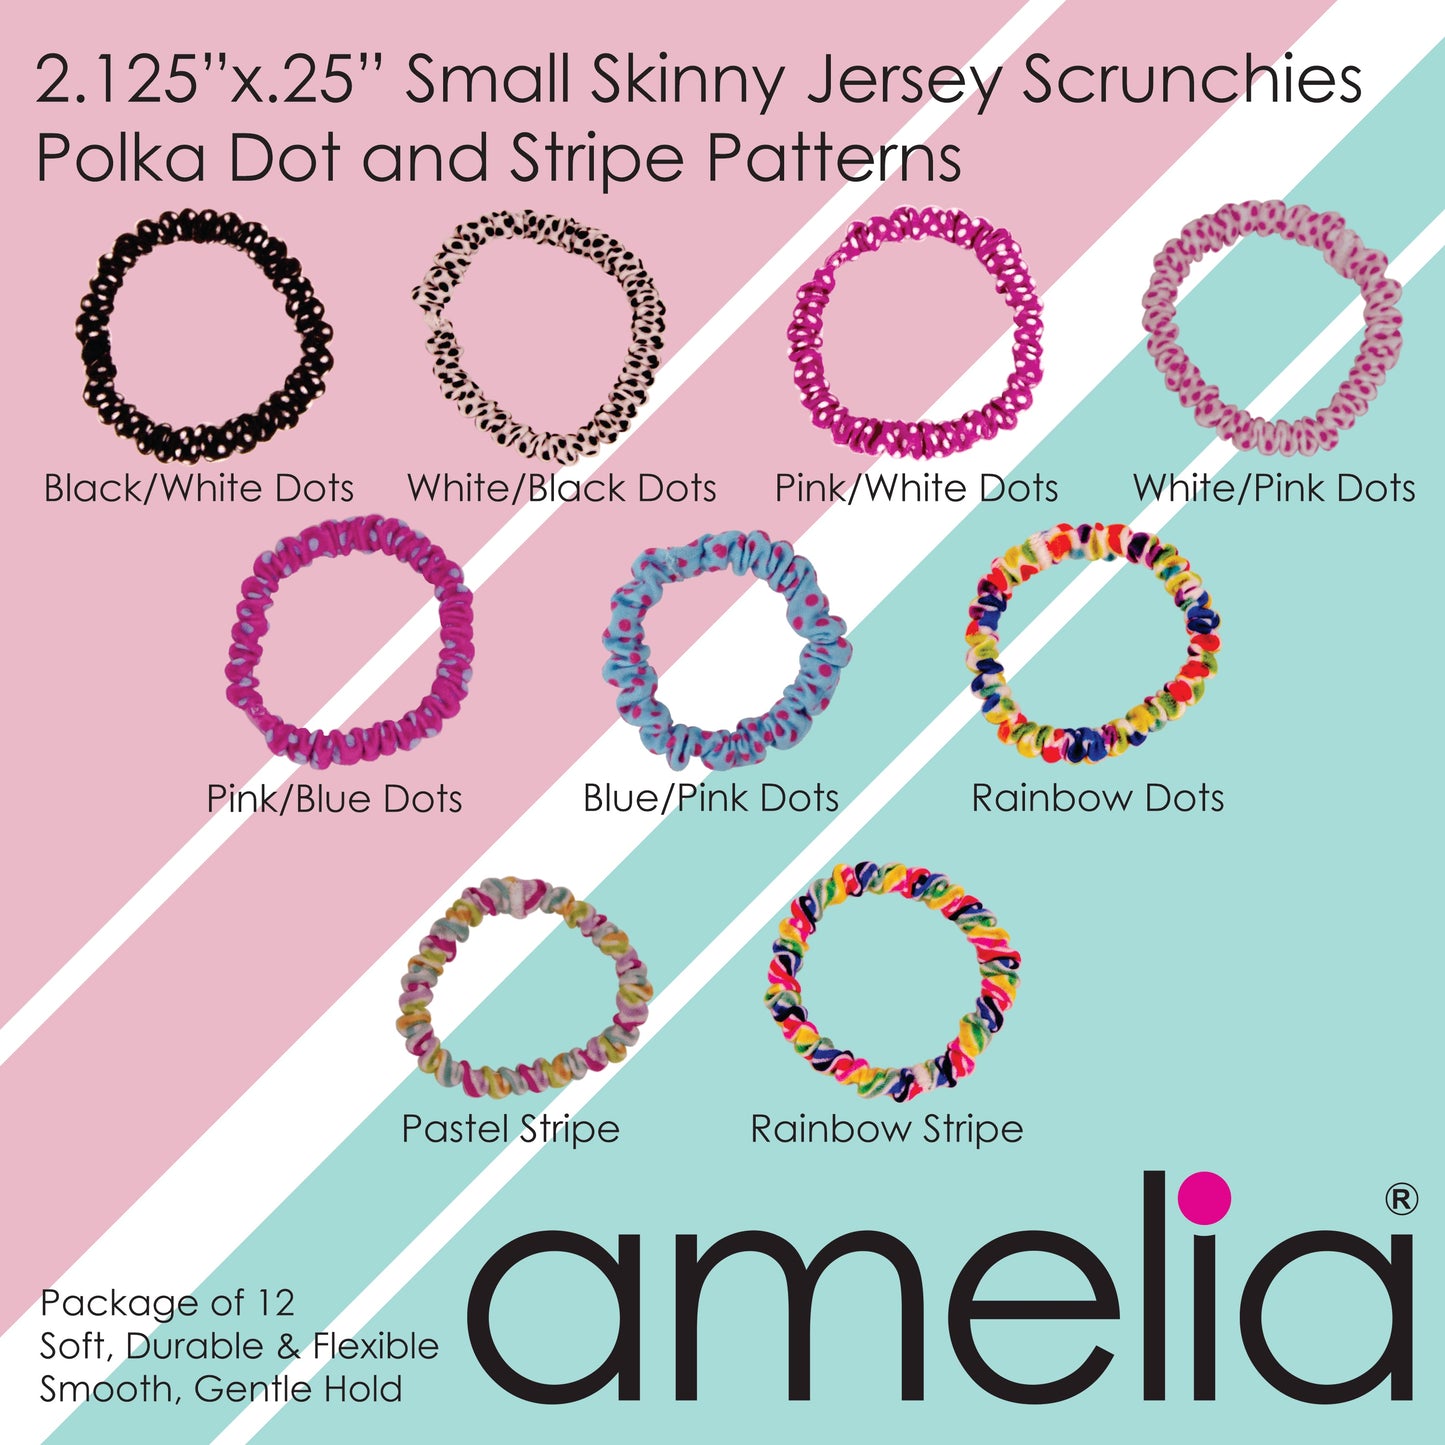 Amelia Beauty, Pink with Blue Dots Skinny Jersey Scrunchies, 2.125in Diameter, Gentle on Hair, Strong Hold, No Snag, No Dents or Creases. 12 Pack